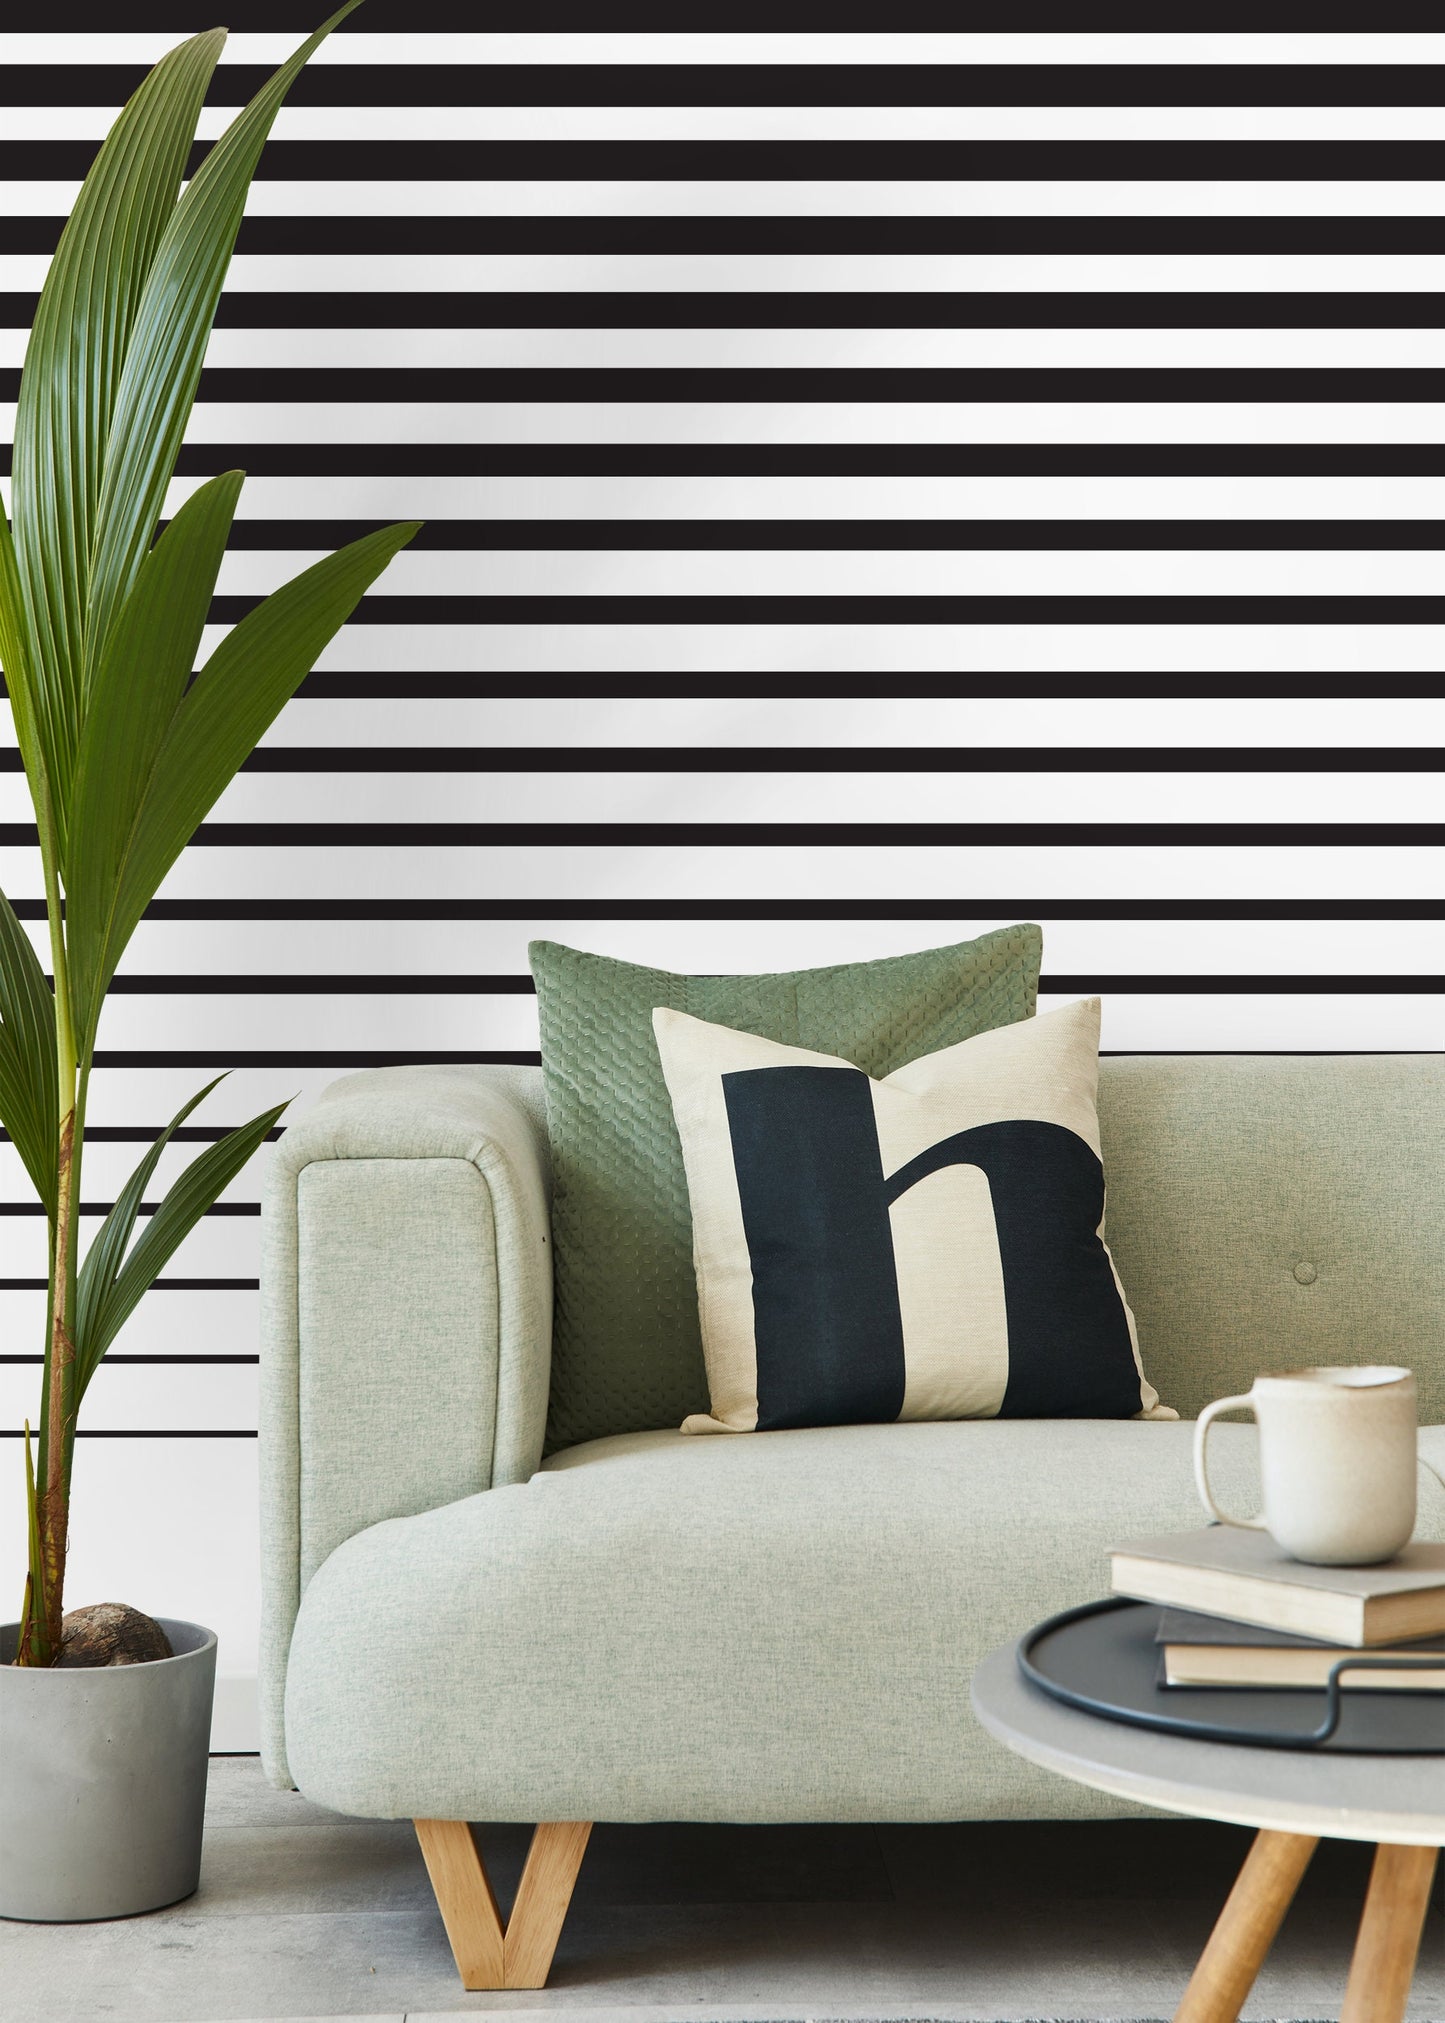 Black and White Strips Removable Wallpaper Wall Mural - Black and White Stripes - B112